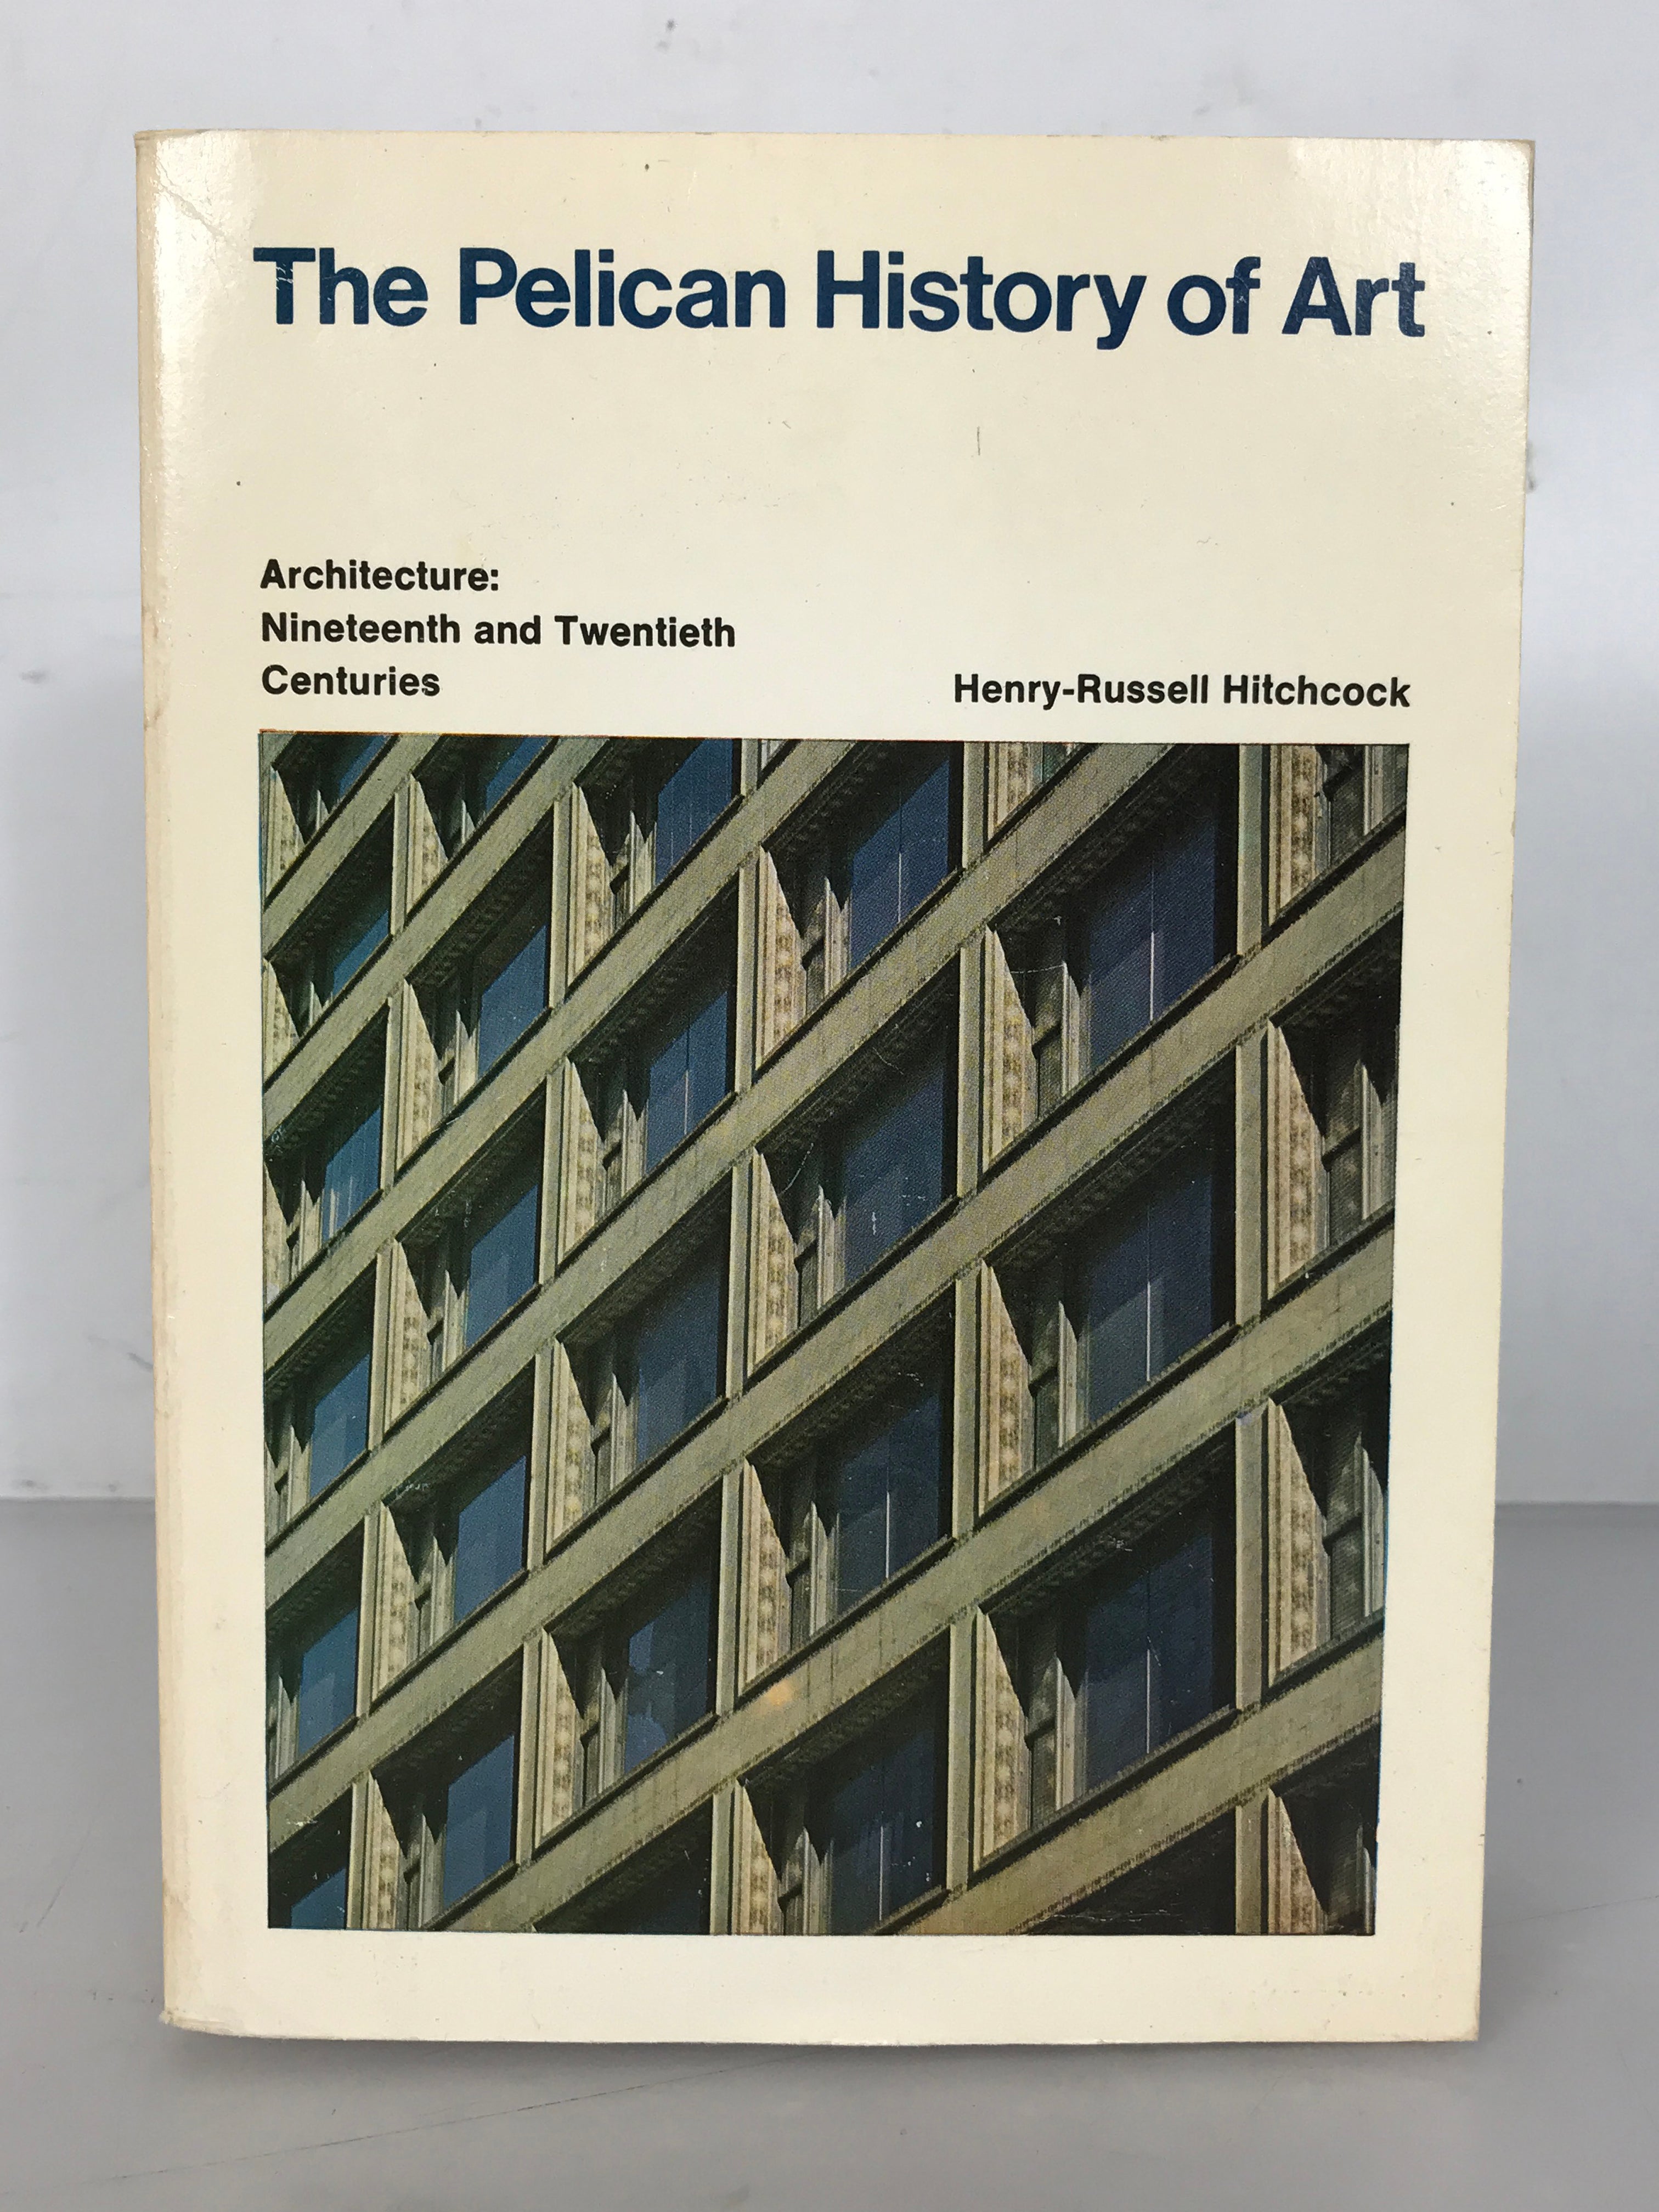 The Pelican History of Art by Henry-Russell Hitchcock Architecture: 19th and 20th Centuries (1982) Fourth Edition SC